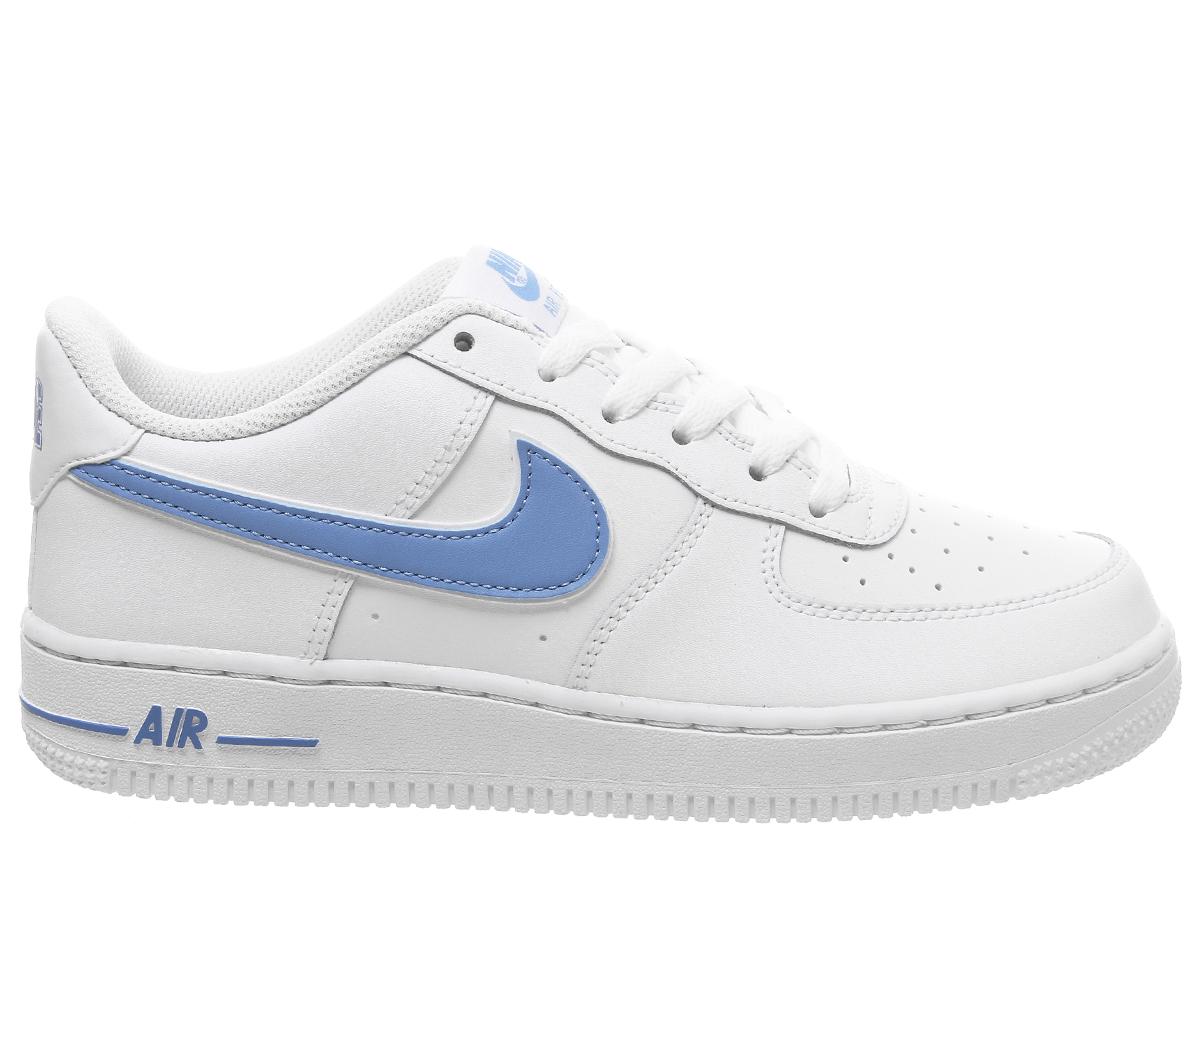 Nike Air Force 1 Trainers White Blue - Women's Trainers